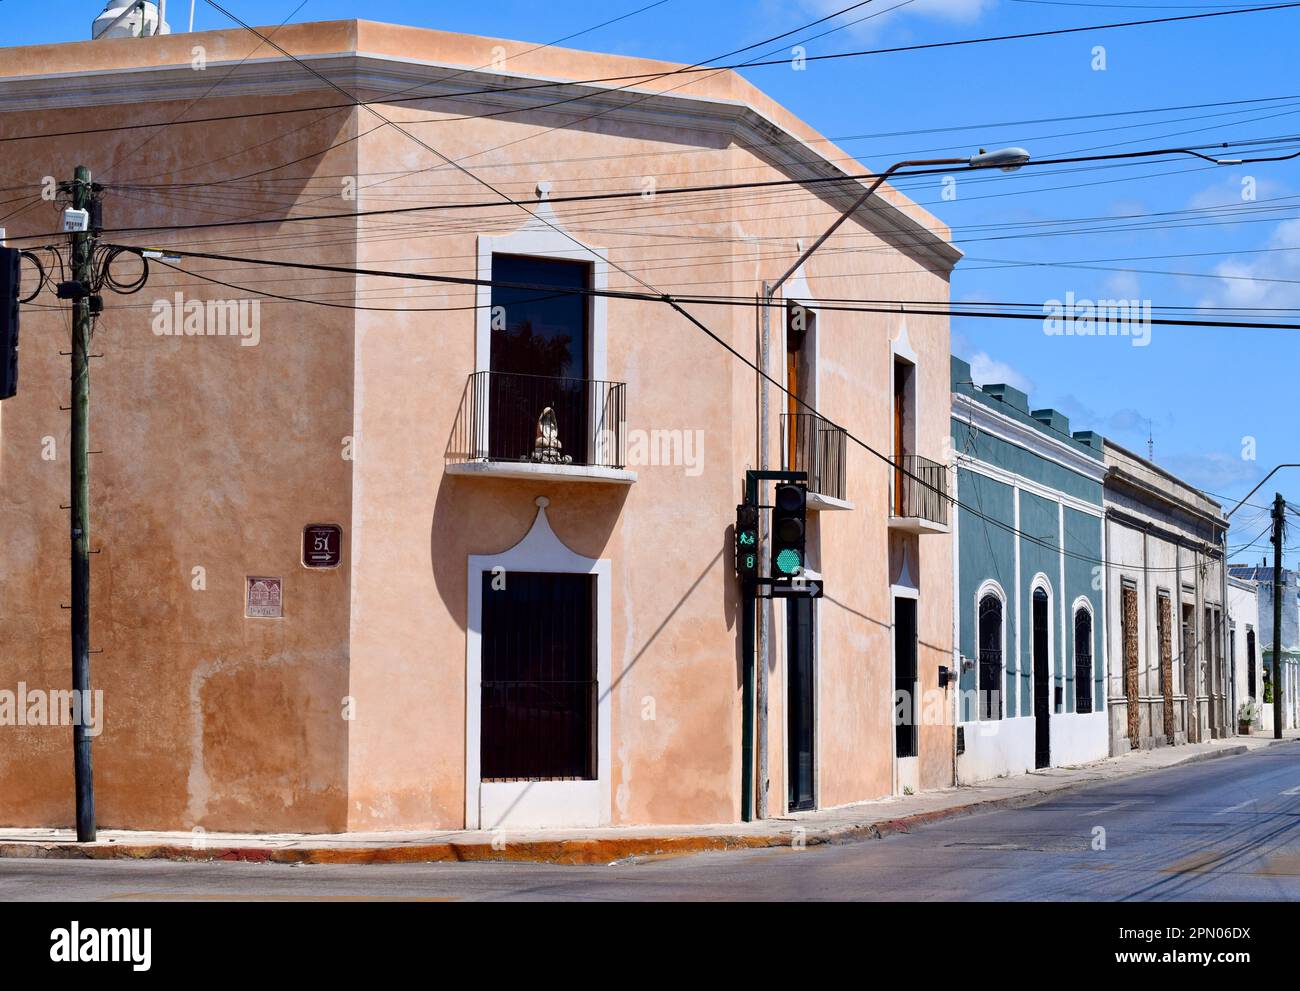 51st street in the colorful city of Merida, Yucatan, Mexico. Stock Photo